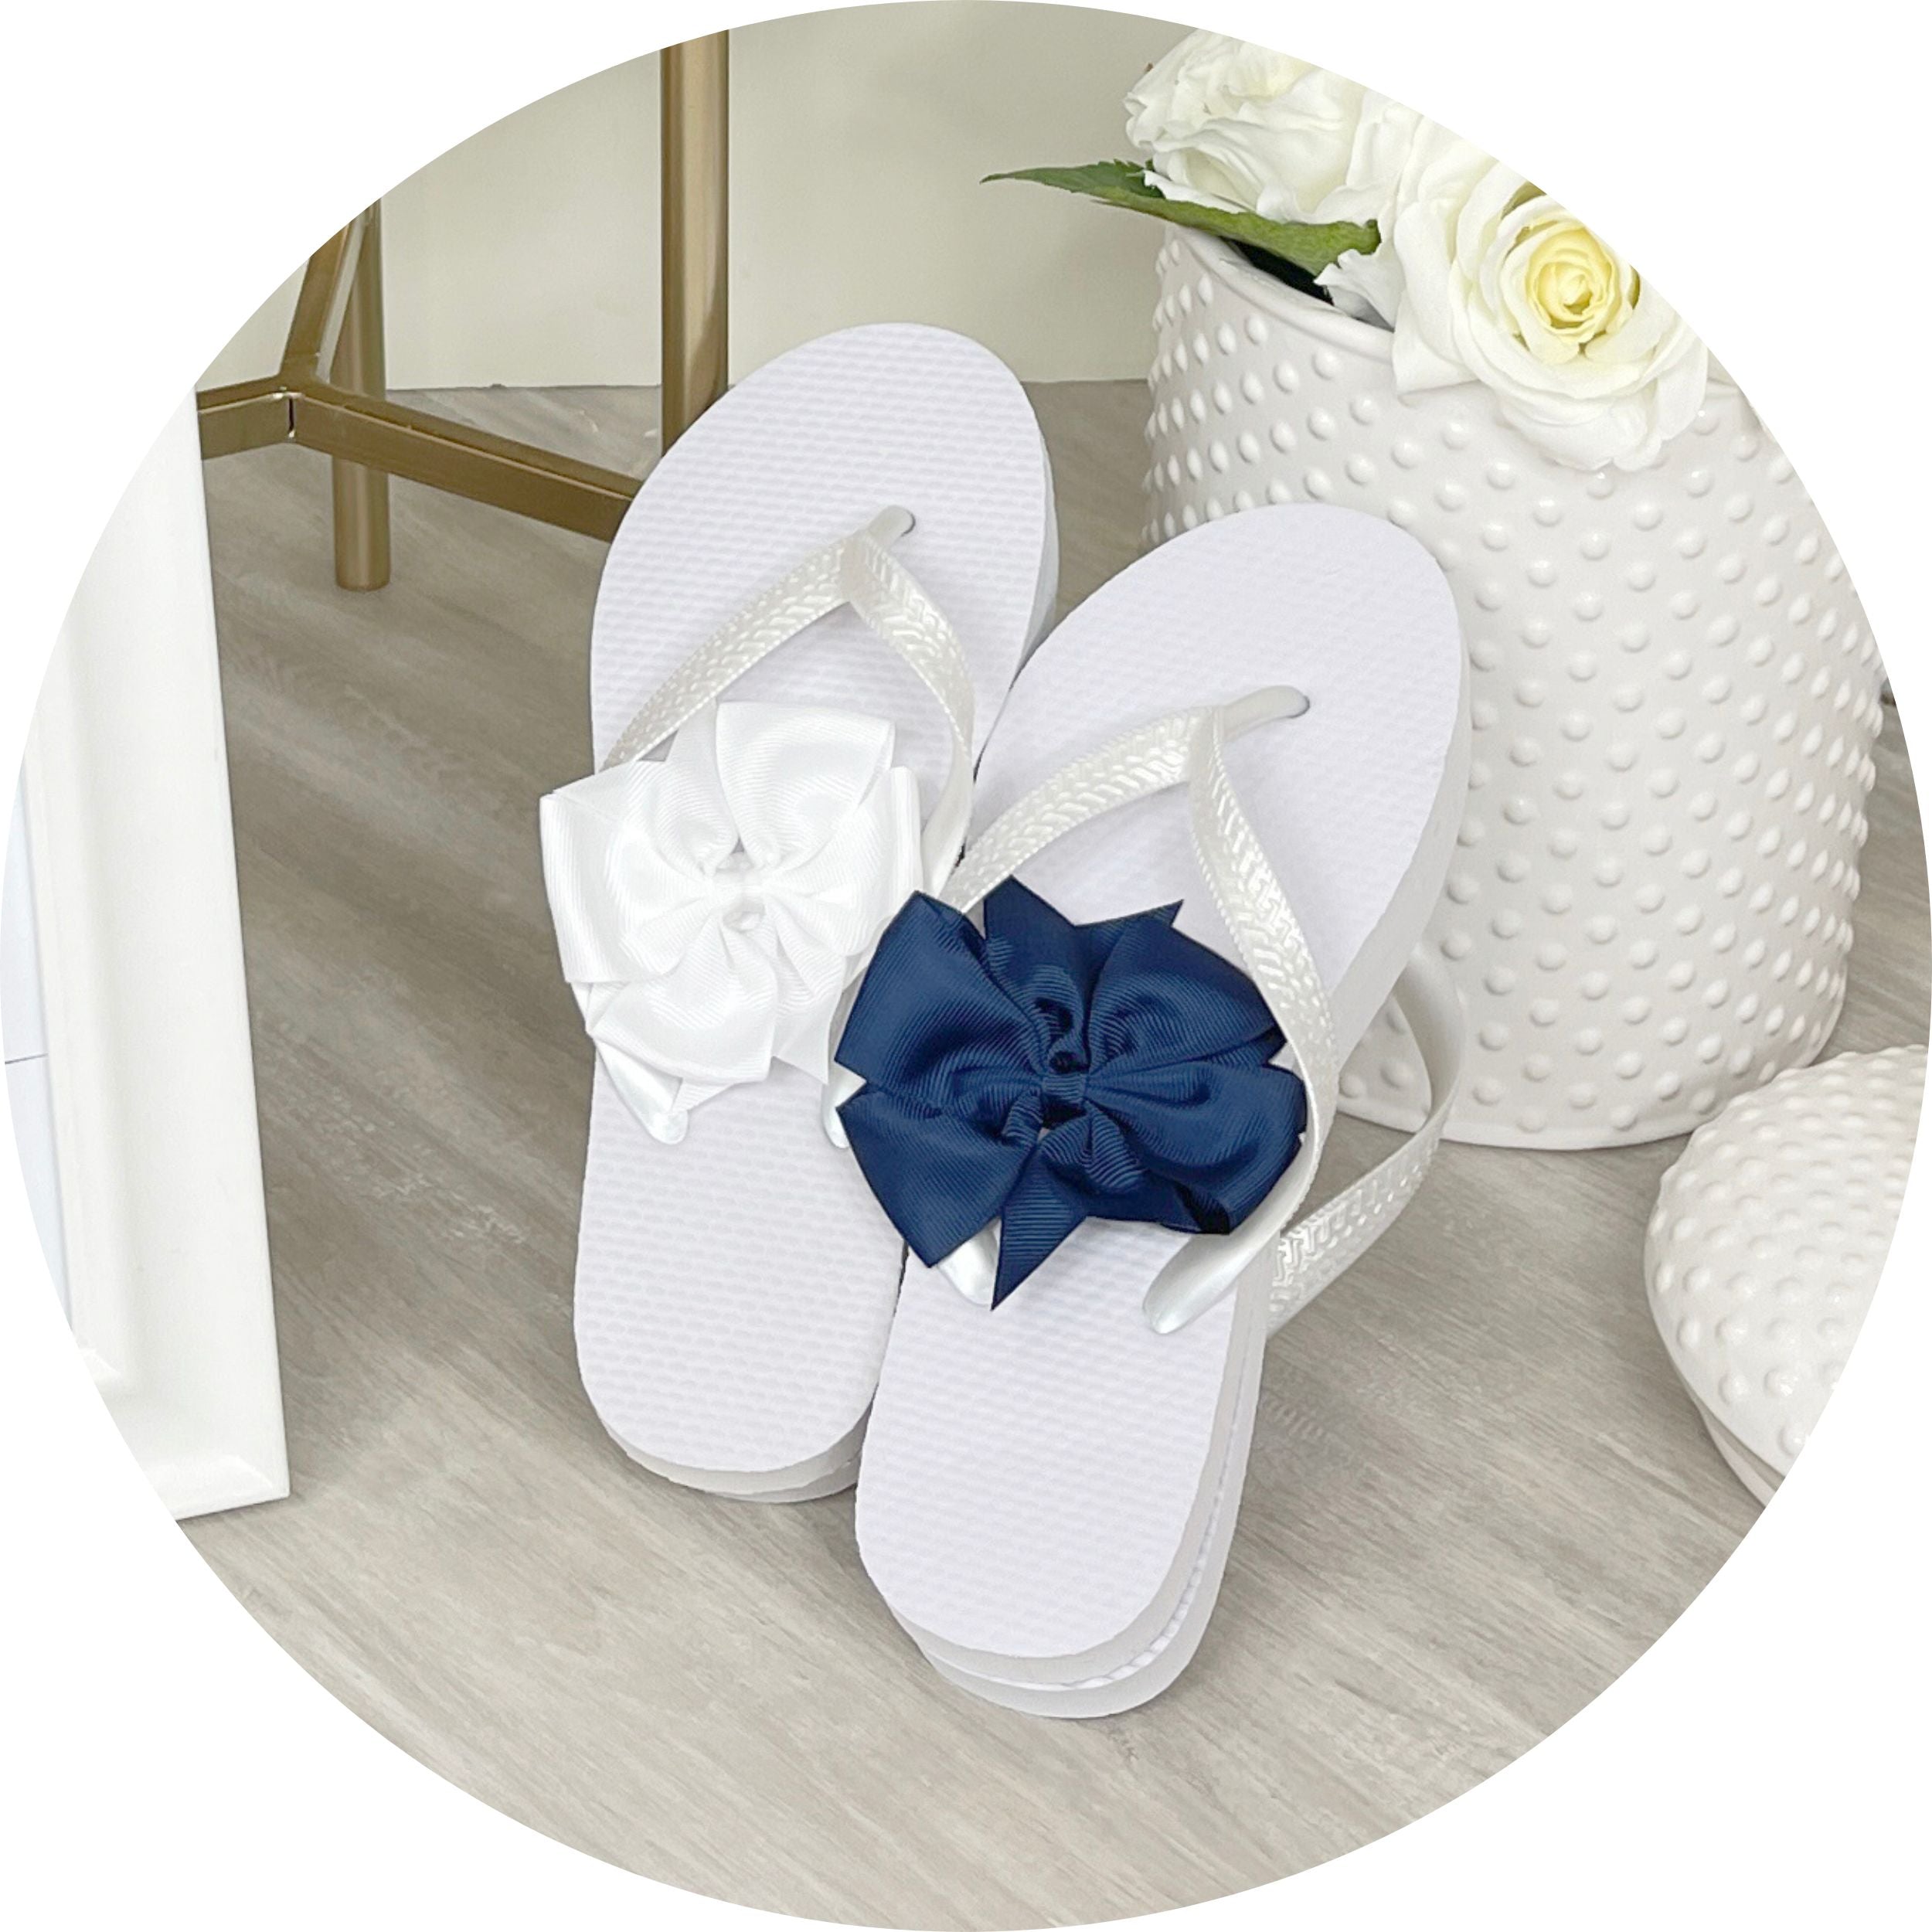 Decorating Flip Flops for Your Wedding Guests